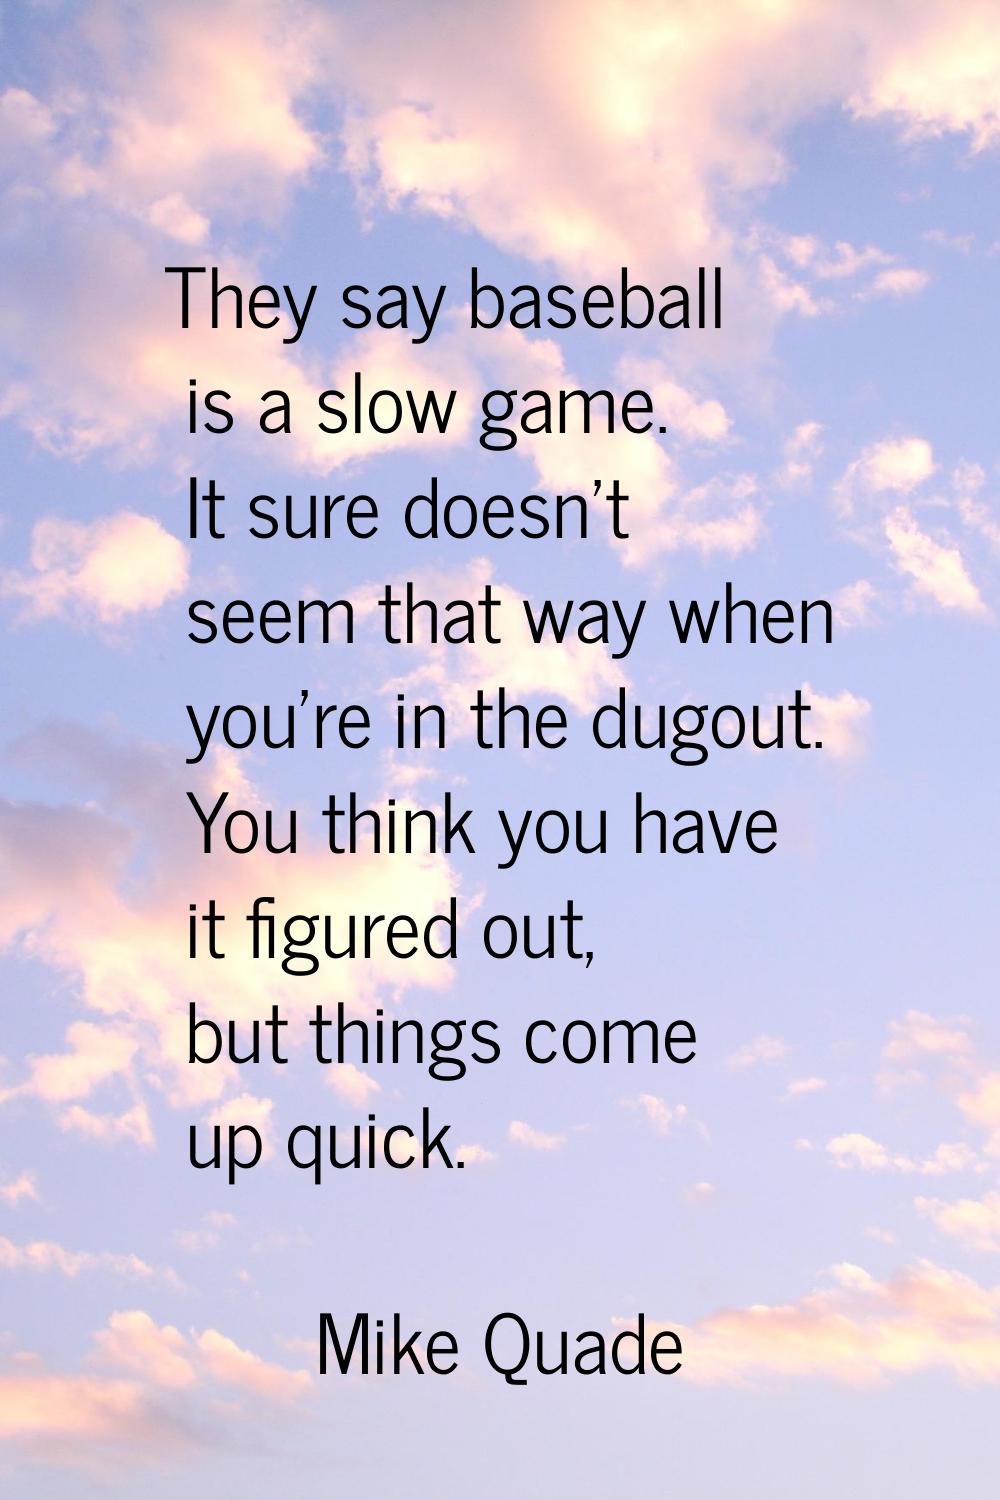 They say baseball is a slow game. It sure doesn't seem that way when you're in the dugout. You thin